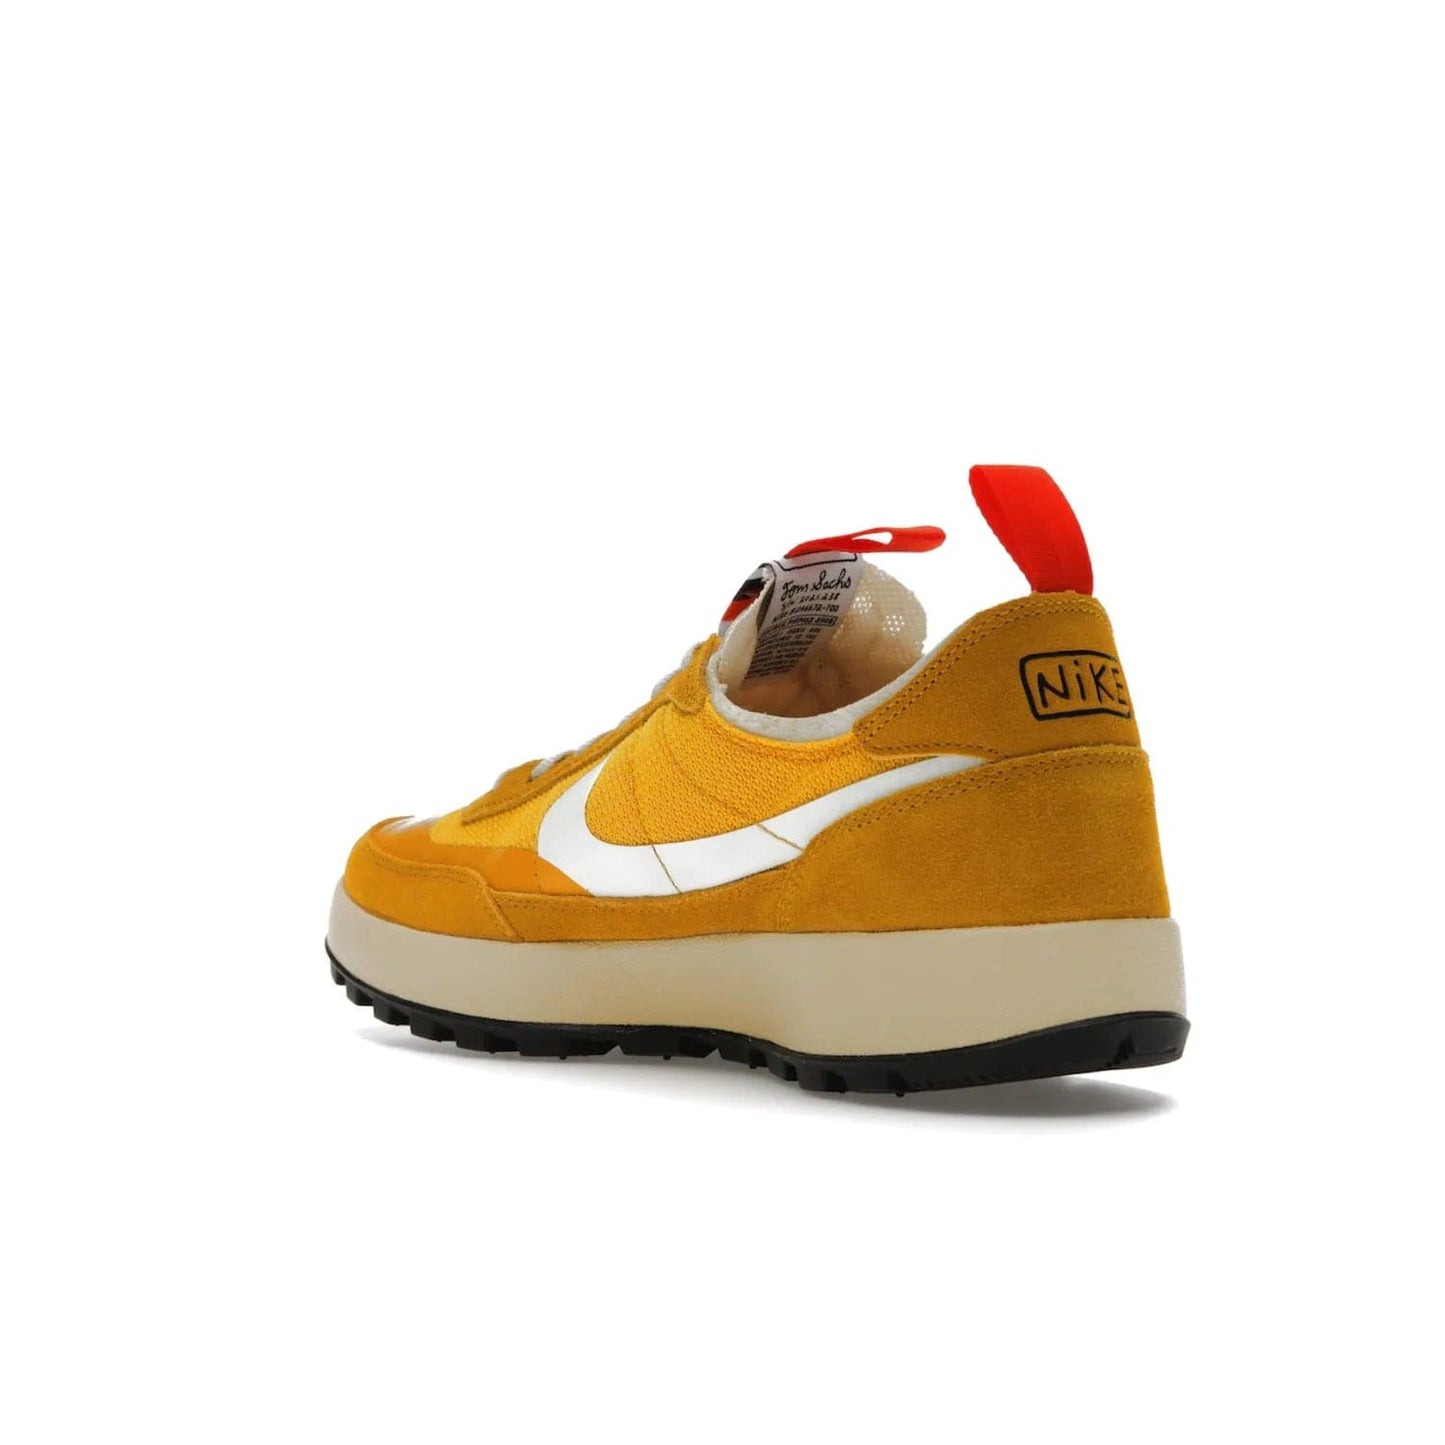 NikeCraft General Purpose Shoe Tom Sachs Archive Dark Sulfur - Image 24 - Only at www.BallersClubKickz.com - Collab between Nike & Tom Sachs. The NikeCraft General Purpose Shoe features dark sulfur mesh upper, suede overlays, contrasting white Swoosh and orange tabs. EVA cushioning & black waffle-traction rubber outsole ensures performance. Stylish & perfect for any occasion, the shoe released September 2, 2022.